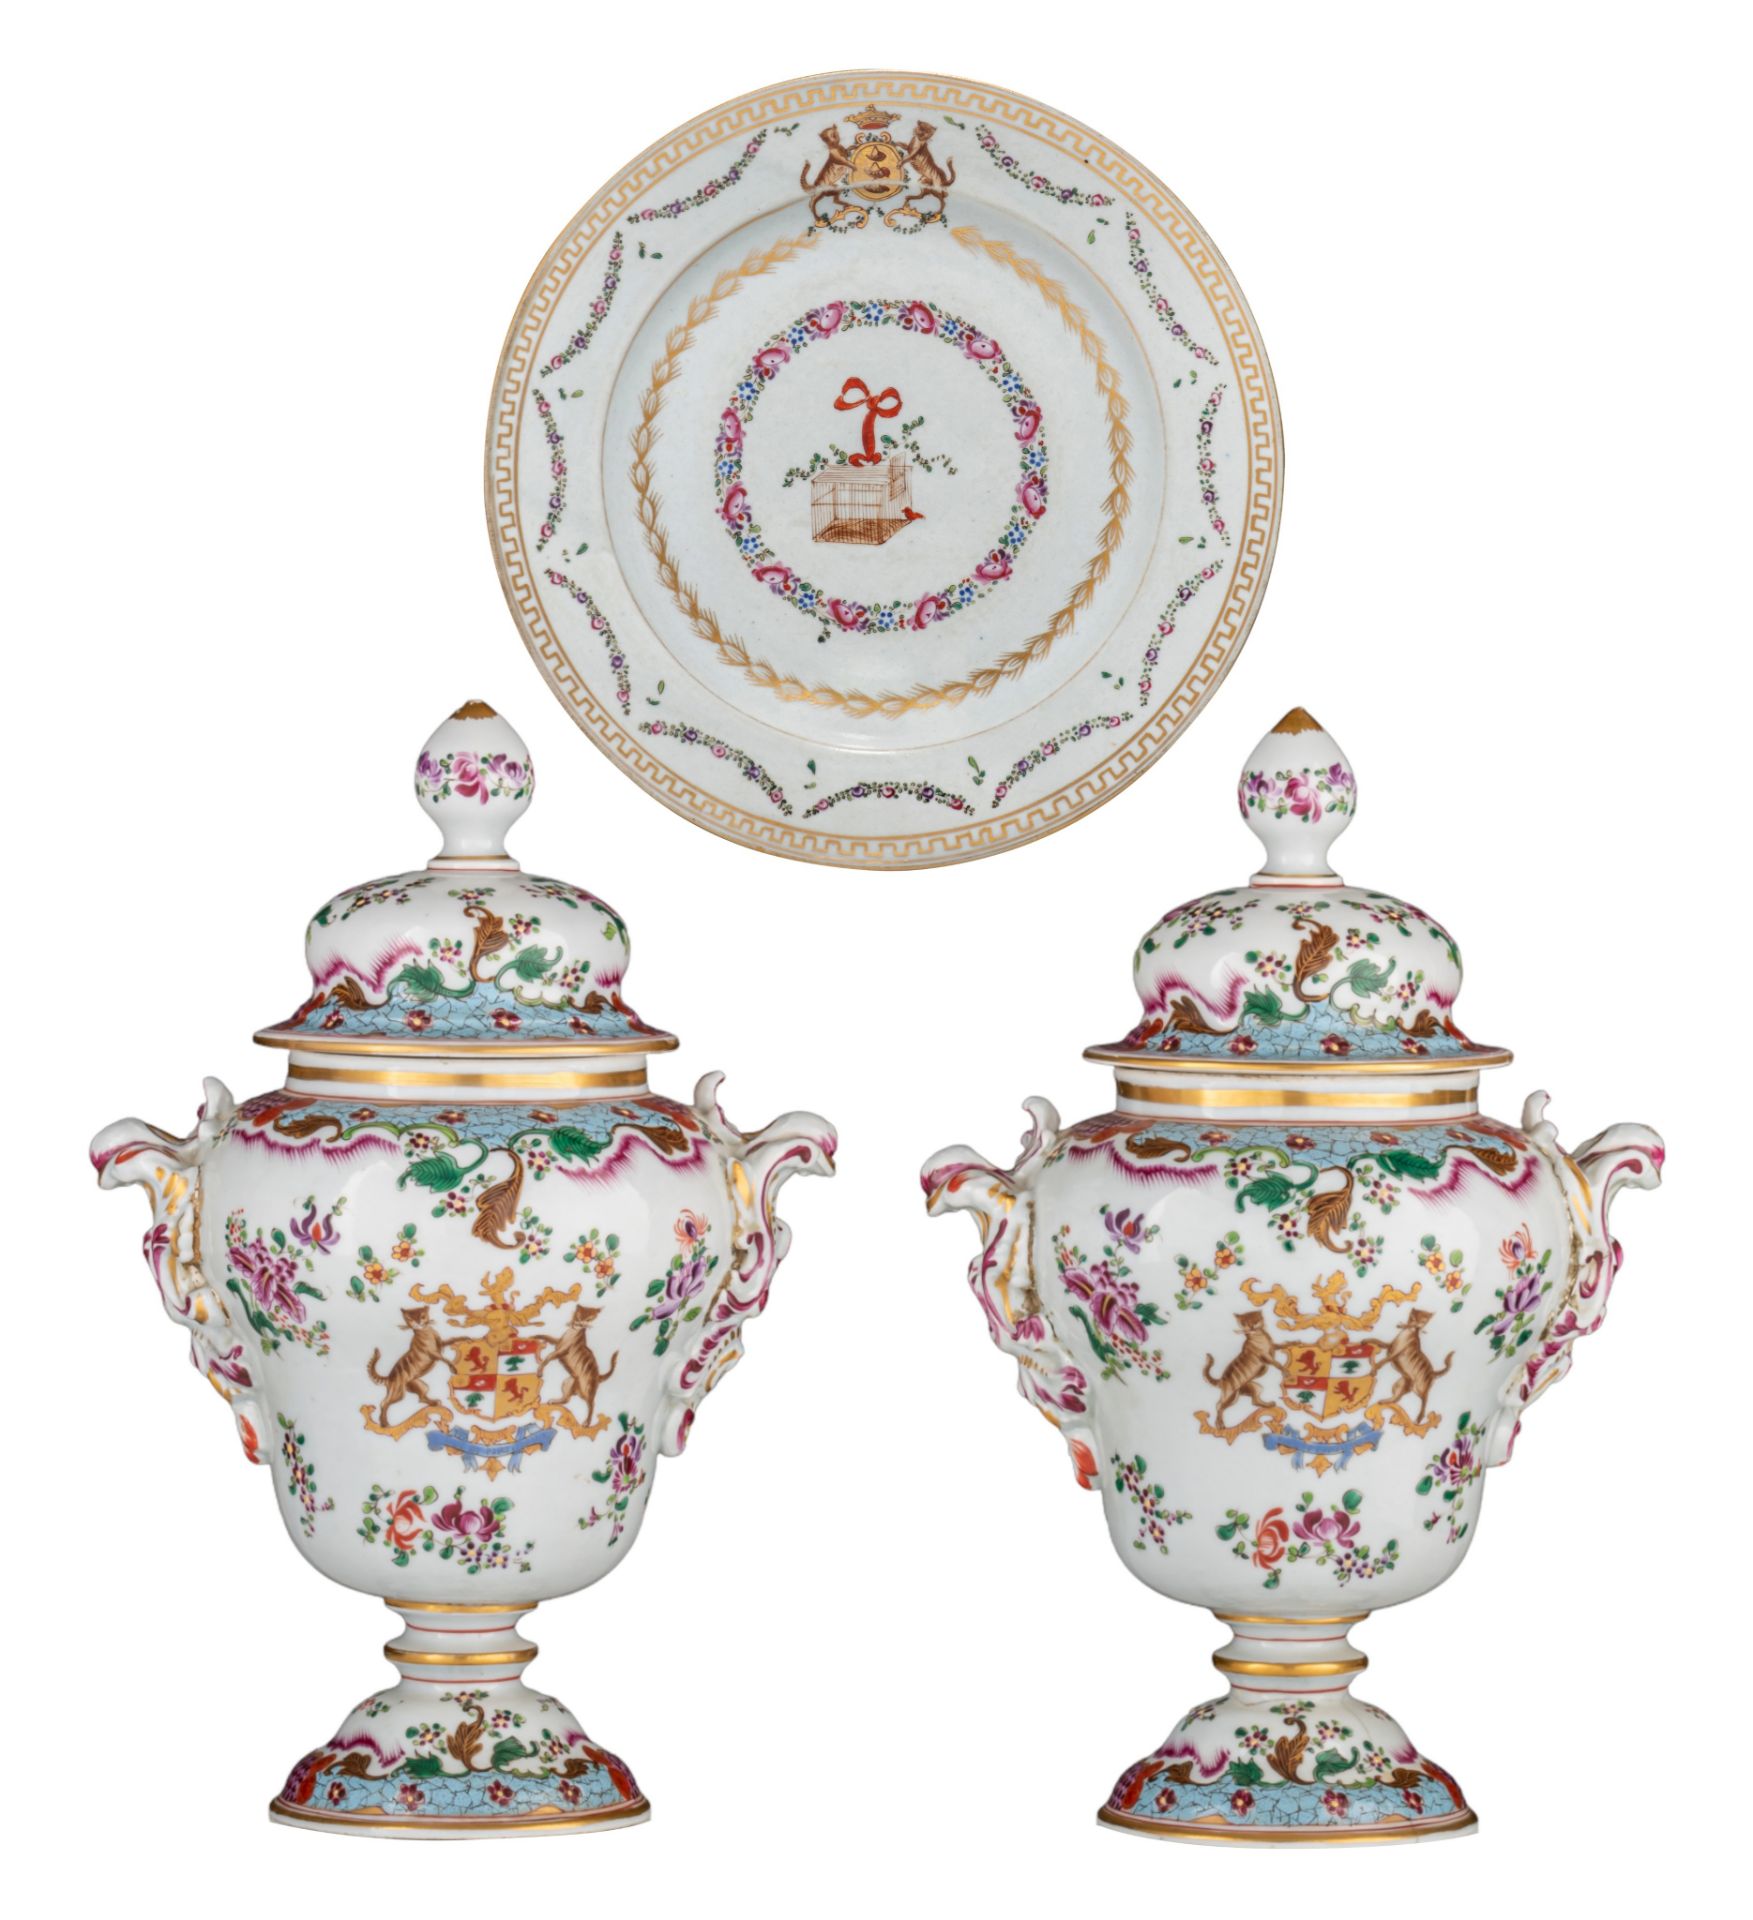 A pair of Samson armorial vases and a matching dish depicting a bird cage, H 34 - ø 23 cm